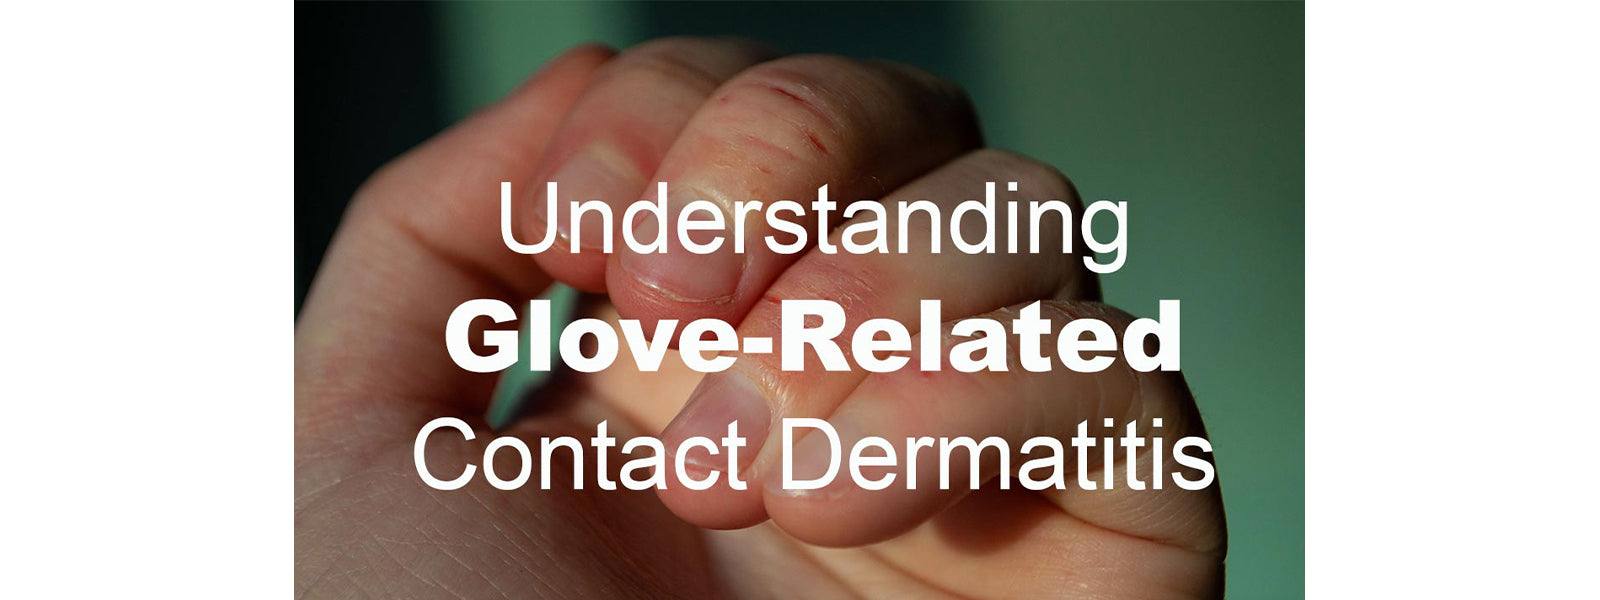 Glove-Related Dermatitis: Understanding the Itch Behind the Gloves - VizoCare